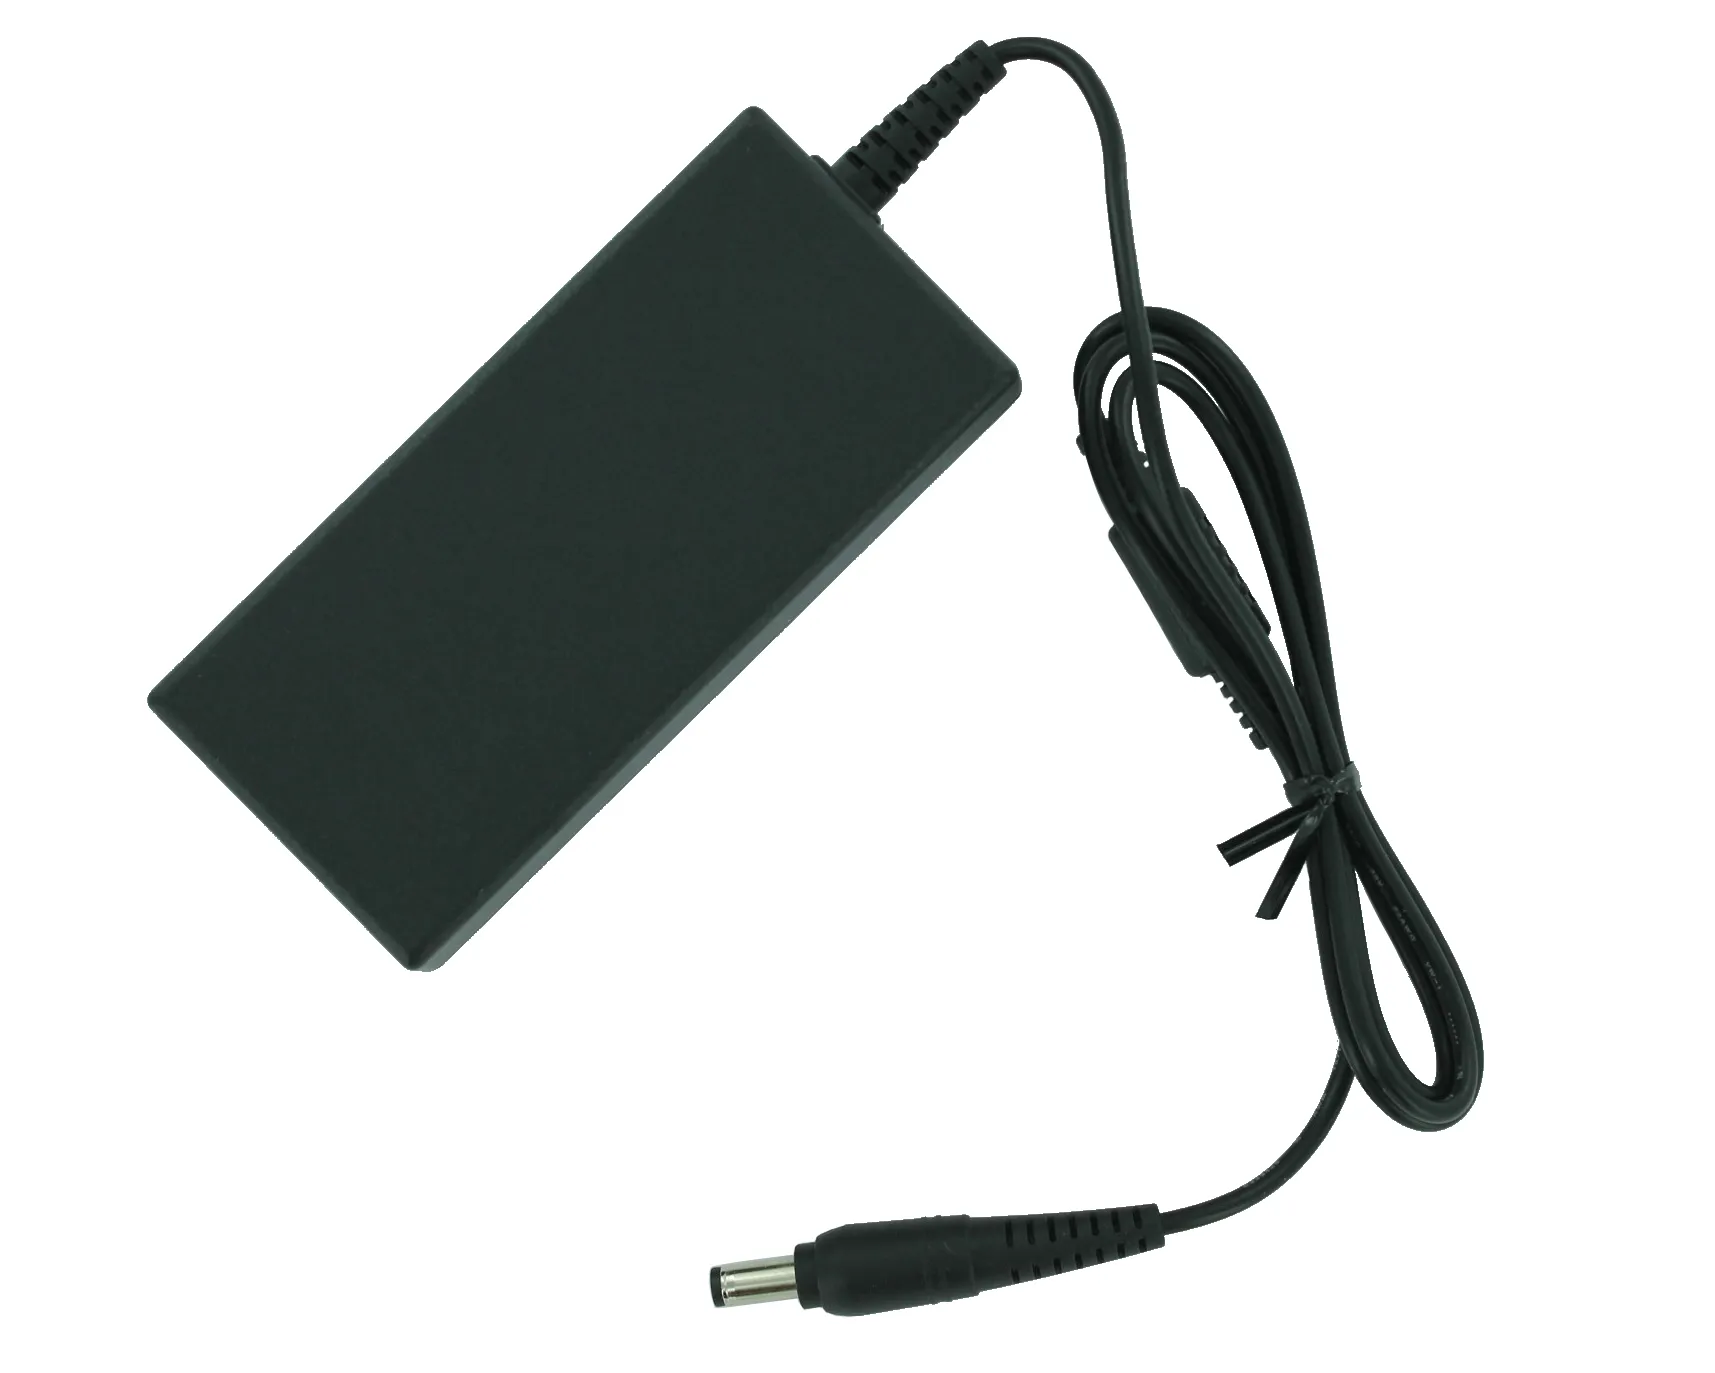 HP N220B 21.5-INCH MONITOR - Z9X89AA Charger (AC Adapter) 911754-001